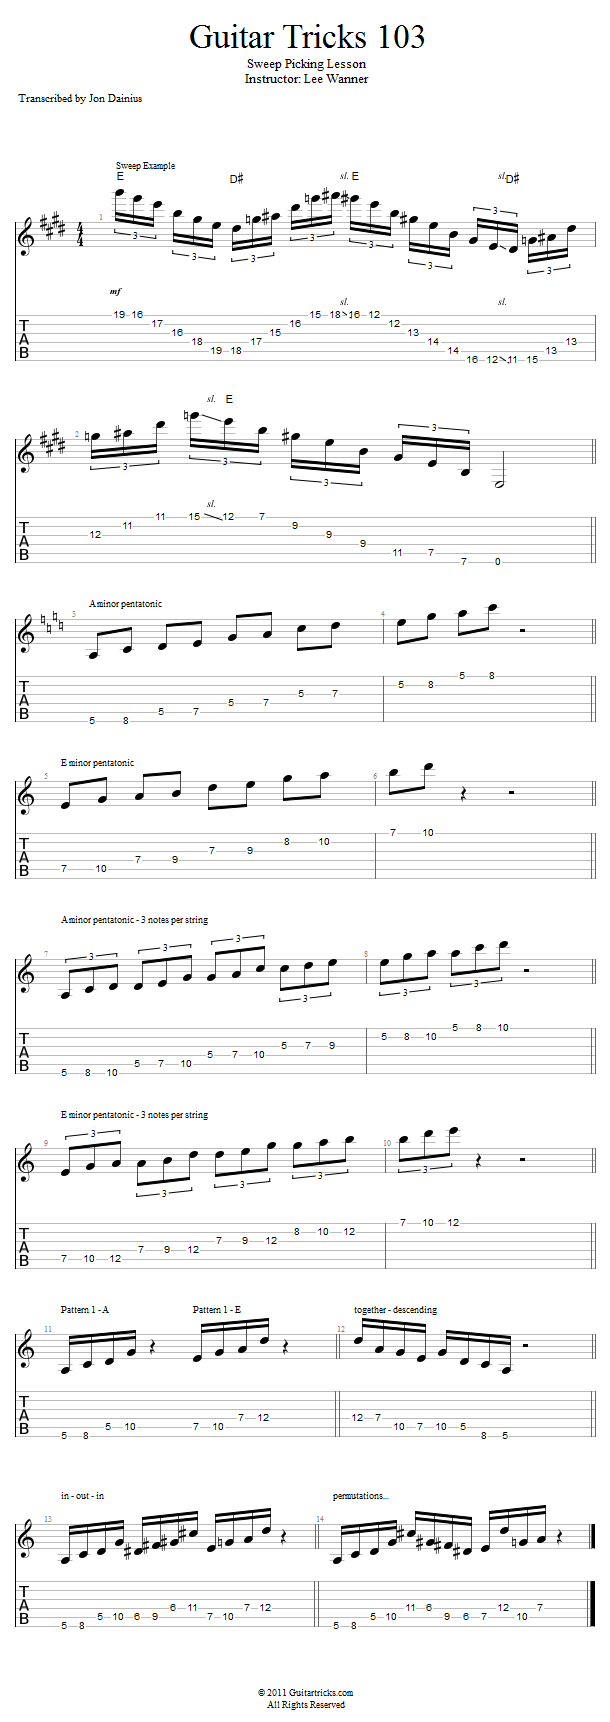 Guitar Tricks 103: Sweep Picking Lesson song notation